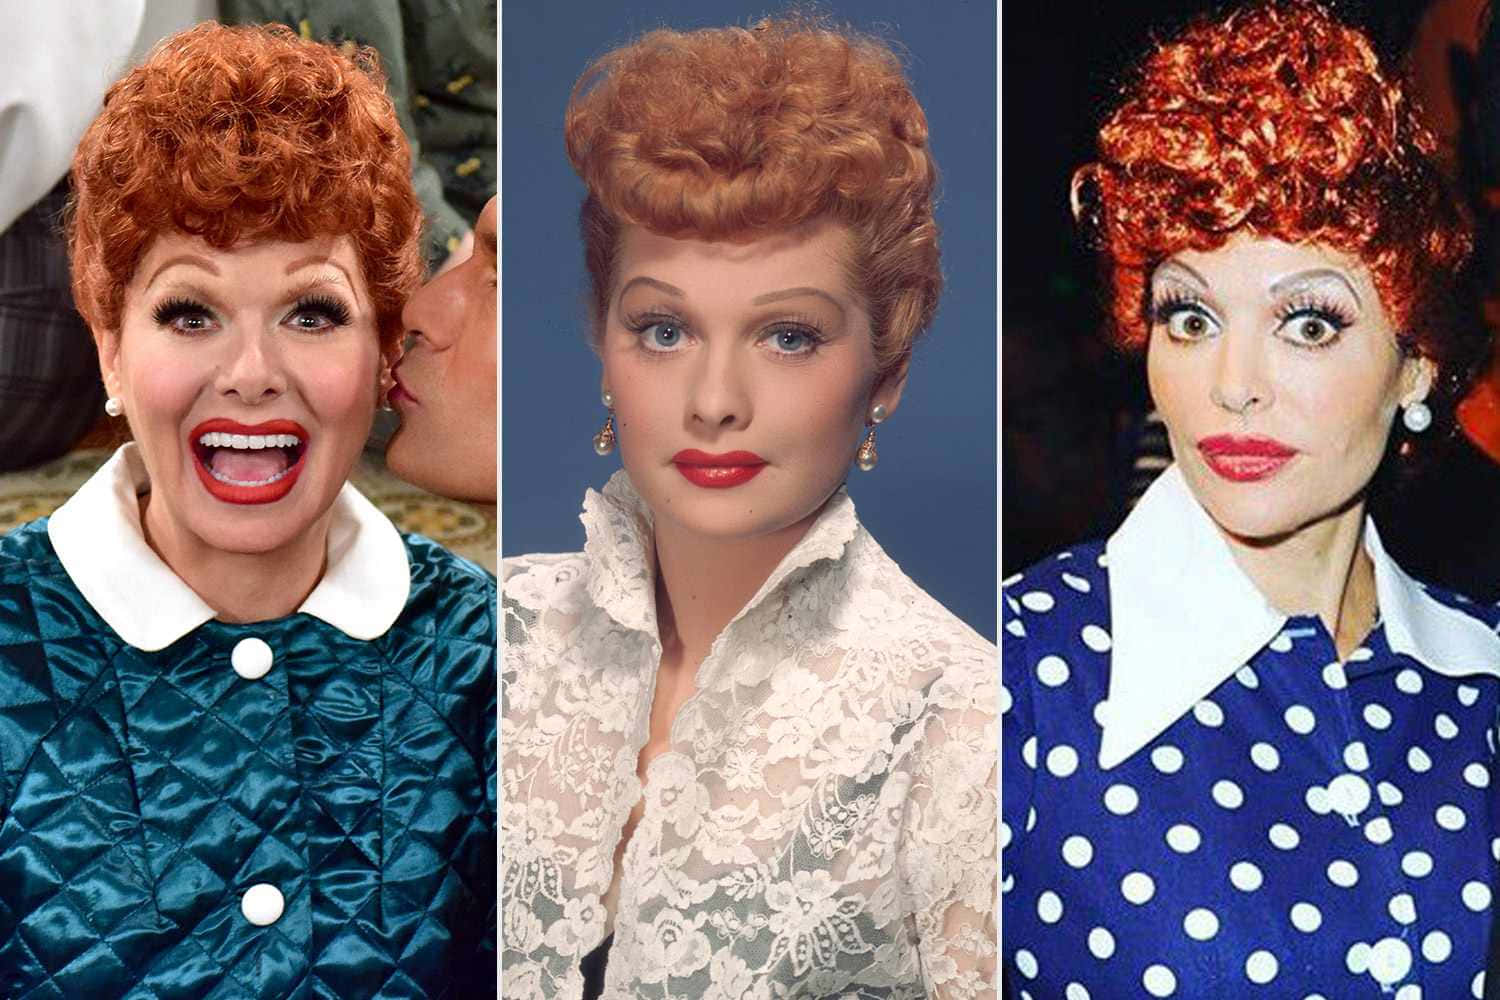 A Collage Of Women With Red Hair And Polka Dots